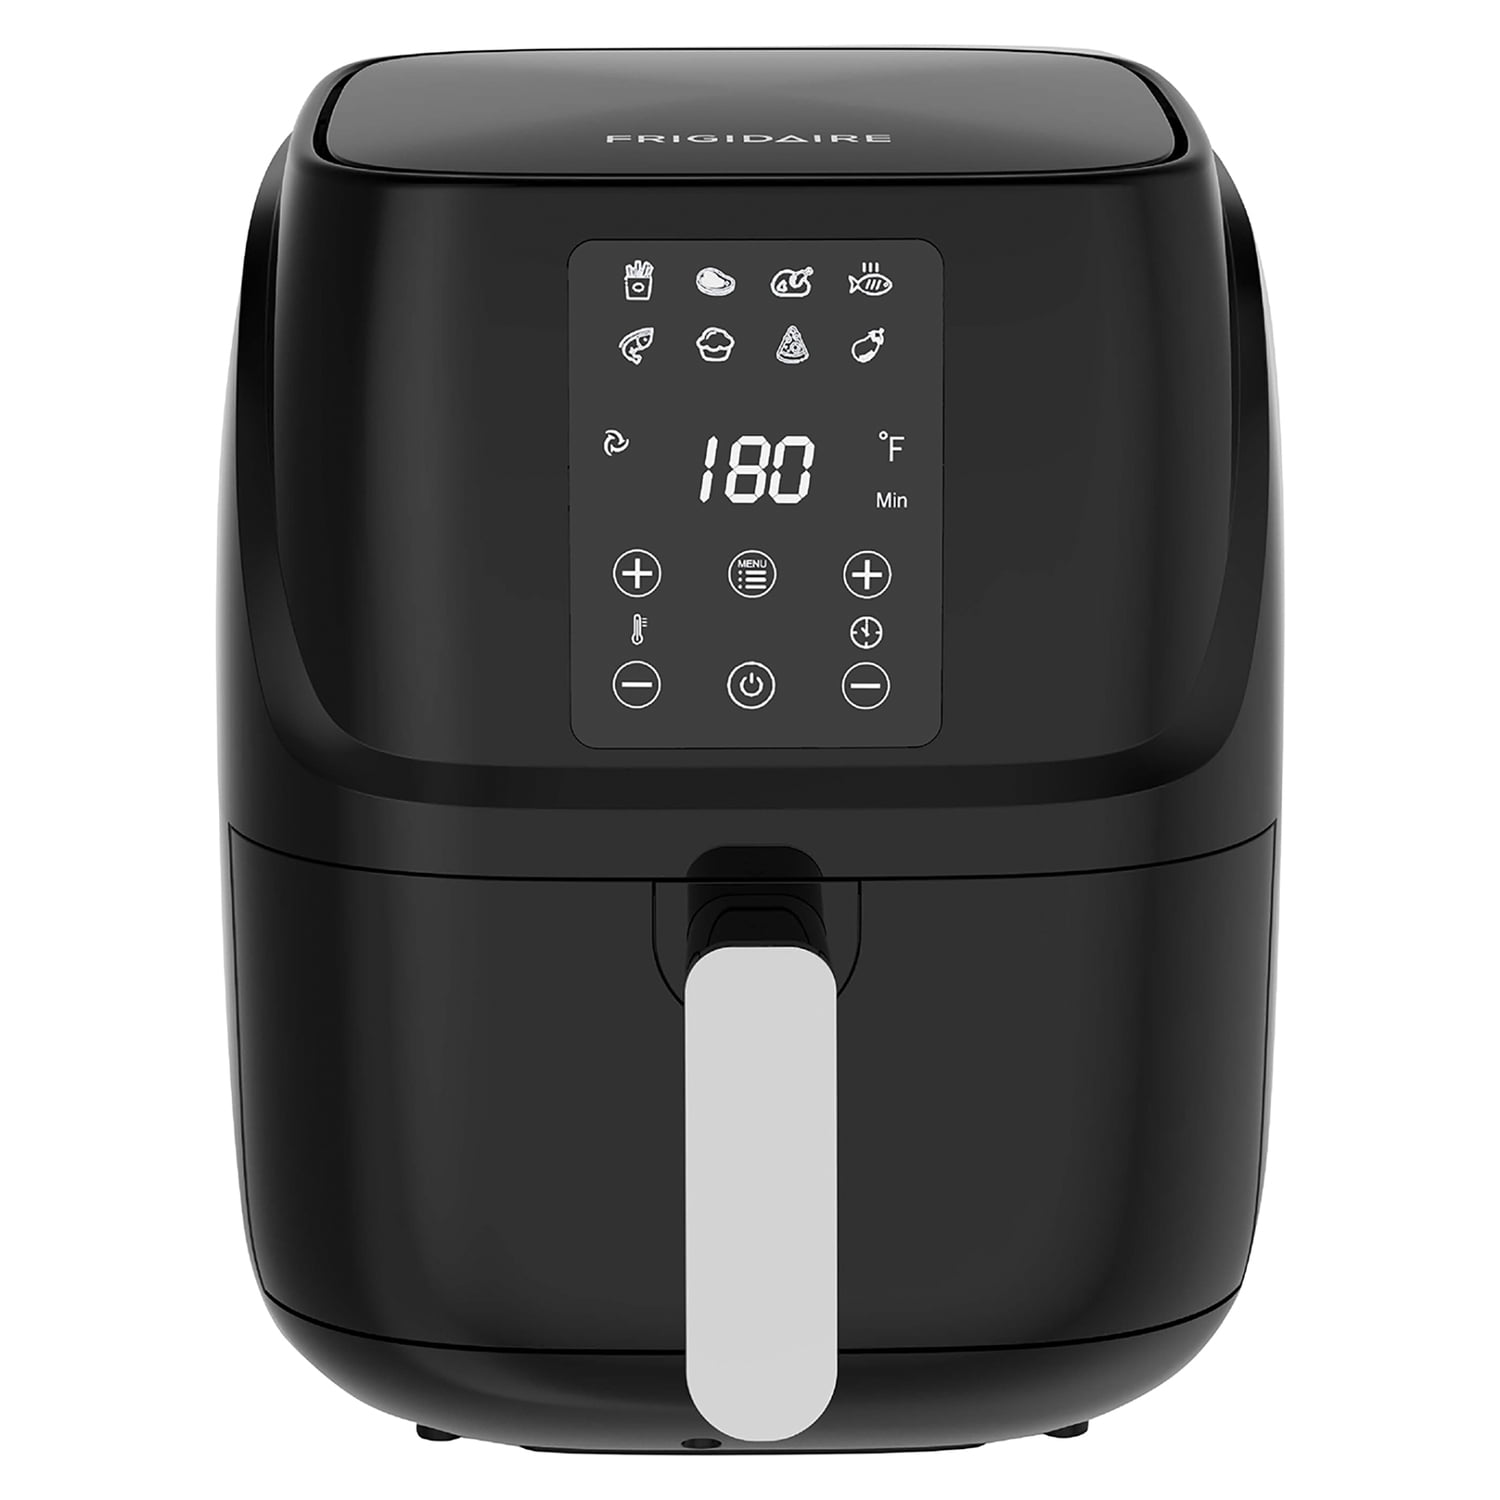 COMFEE' 3.7QT Electric Air Fryer Oven & Oilless Cooker with 8 Menus